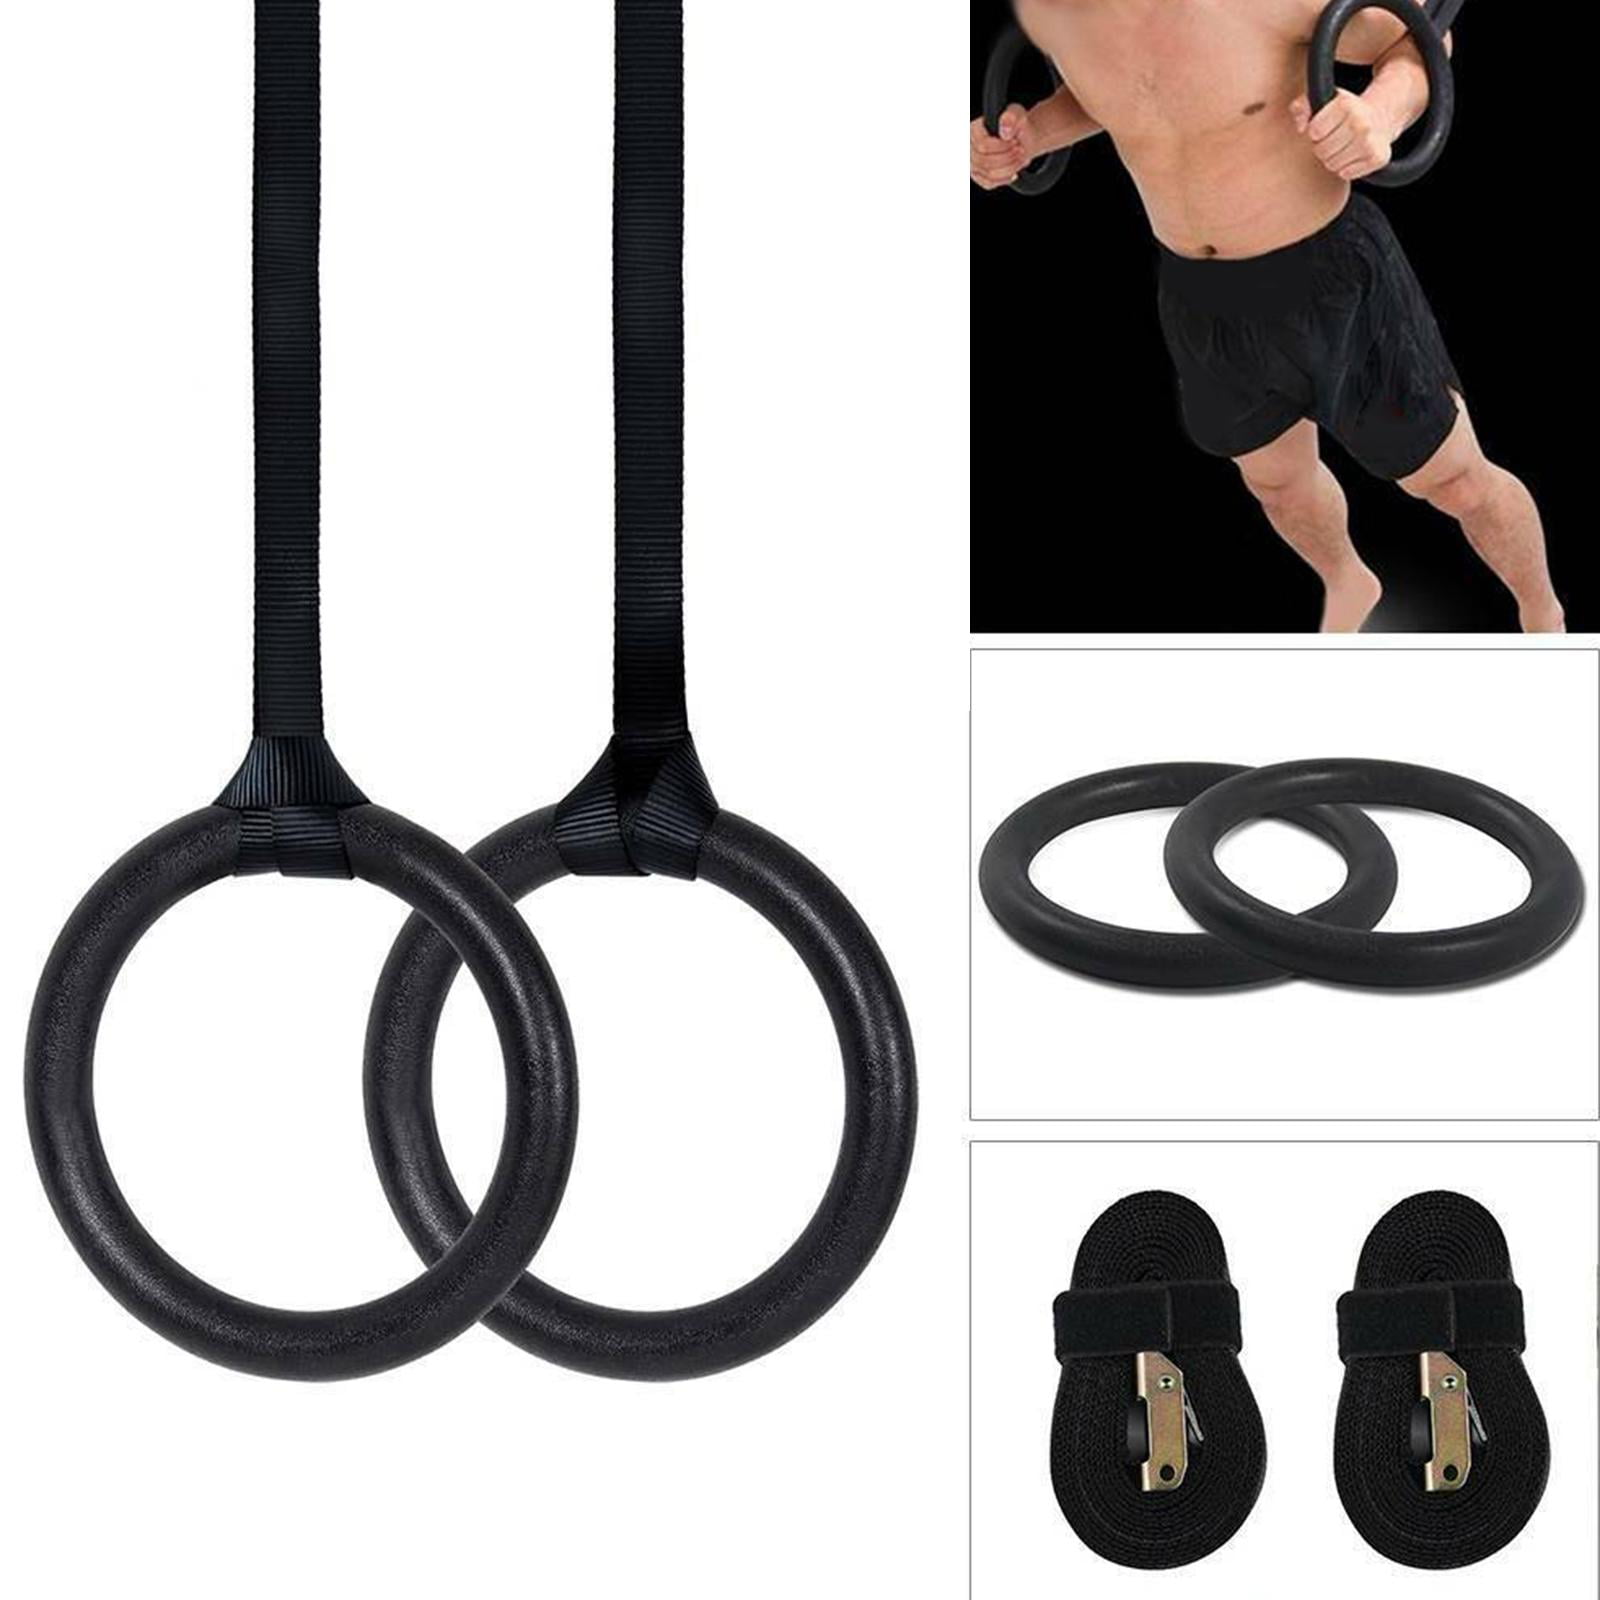 Adjustable Buckle Straps Strength Pull Up Training Gymnastic Olympic Gym Rings 